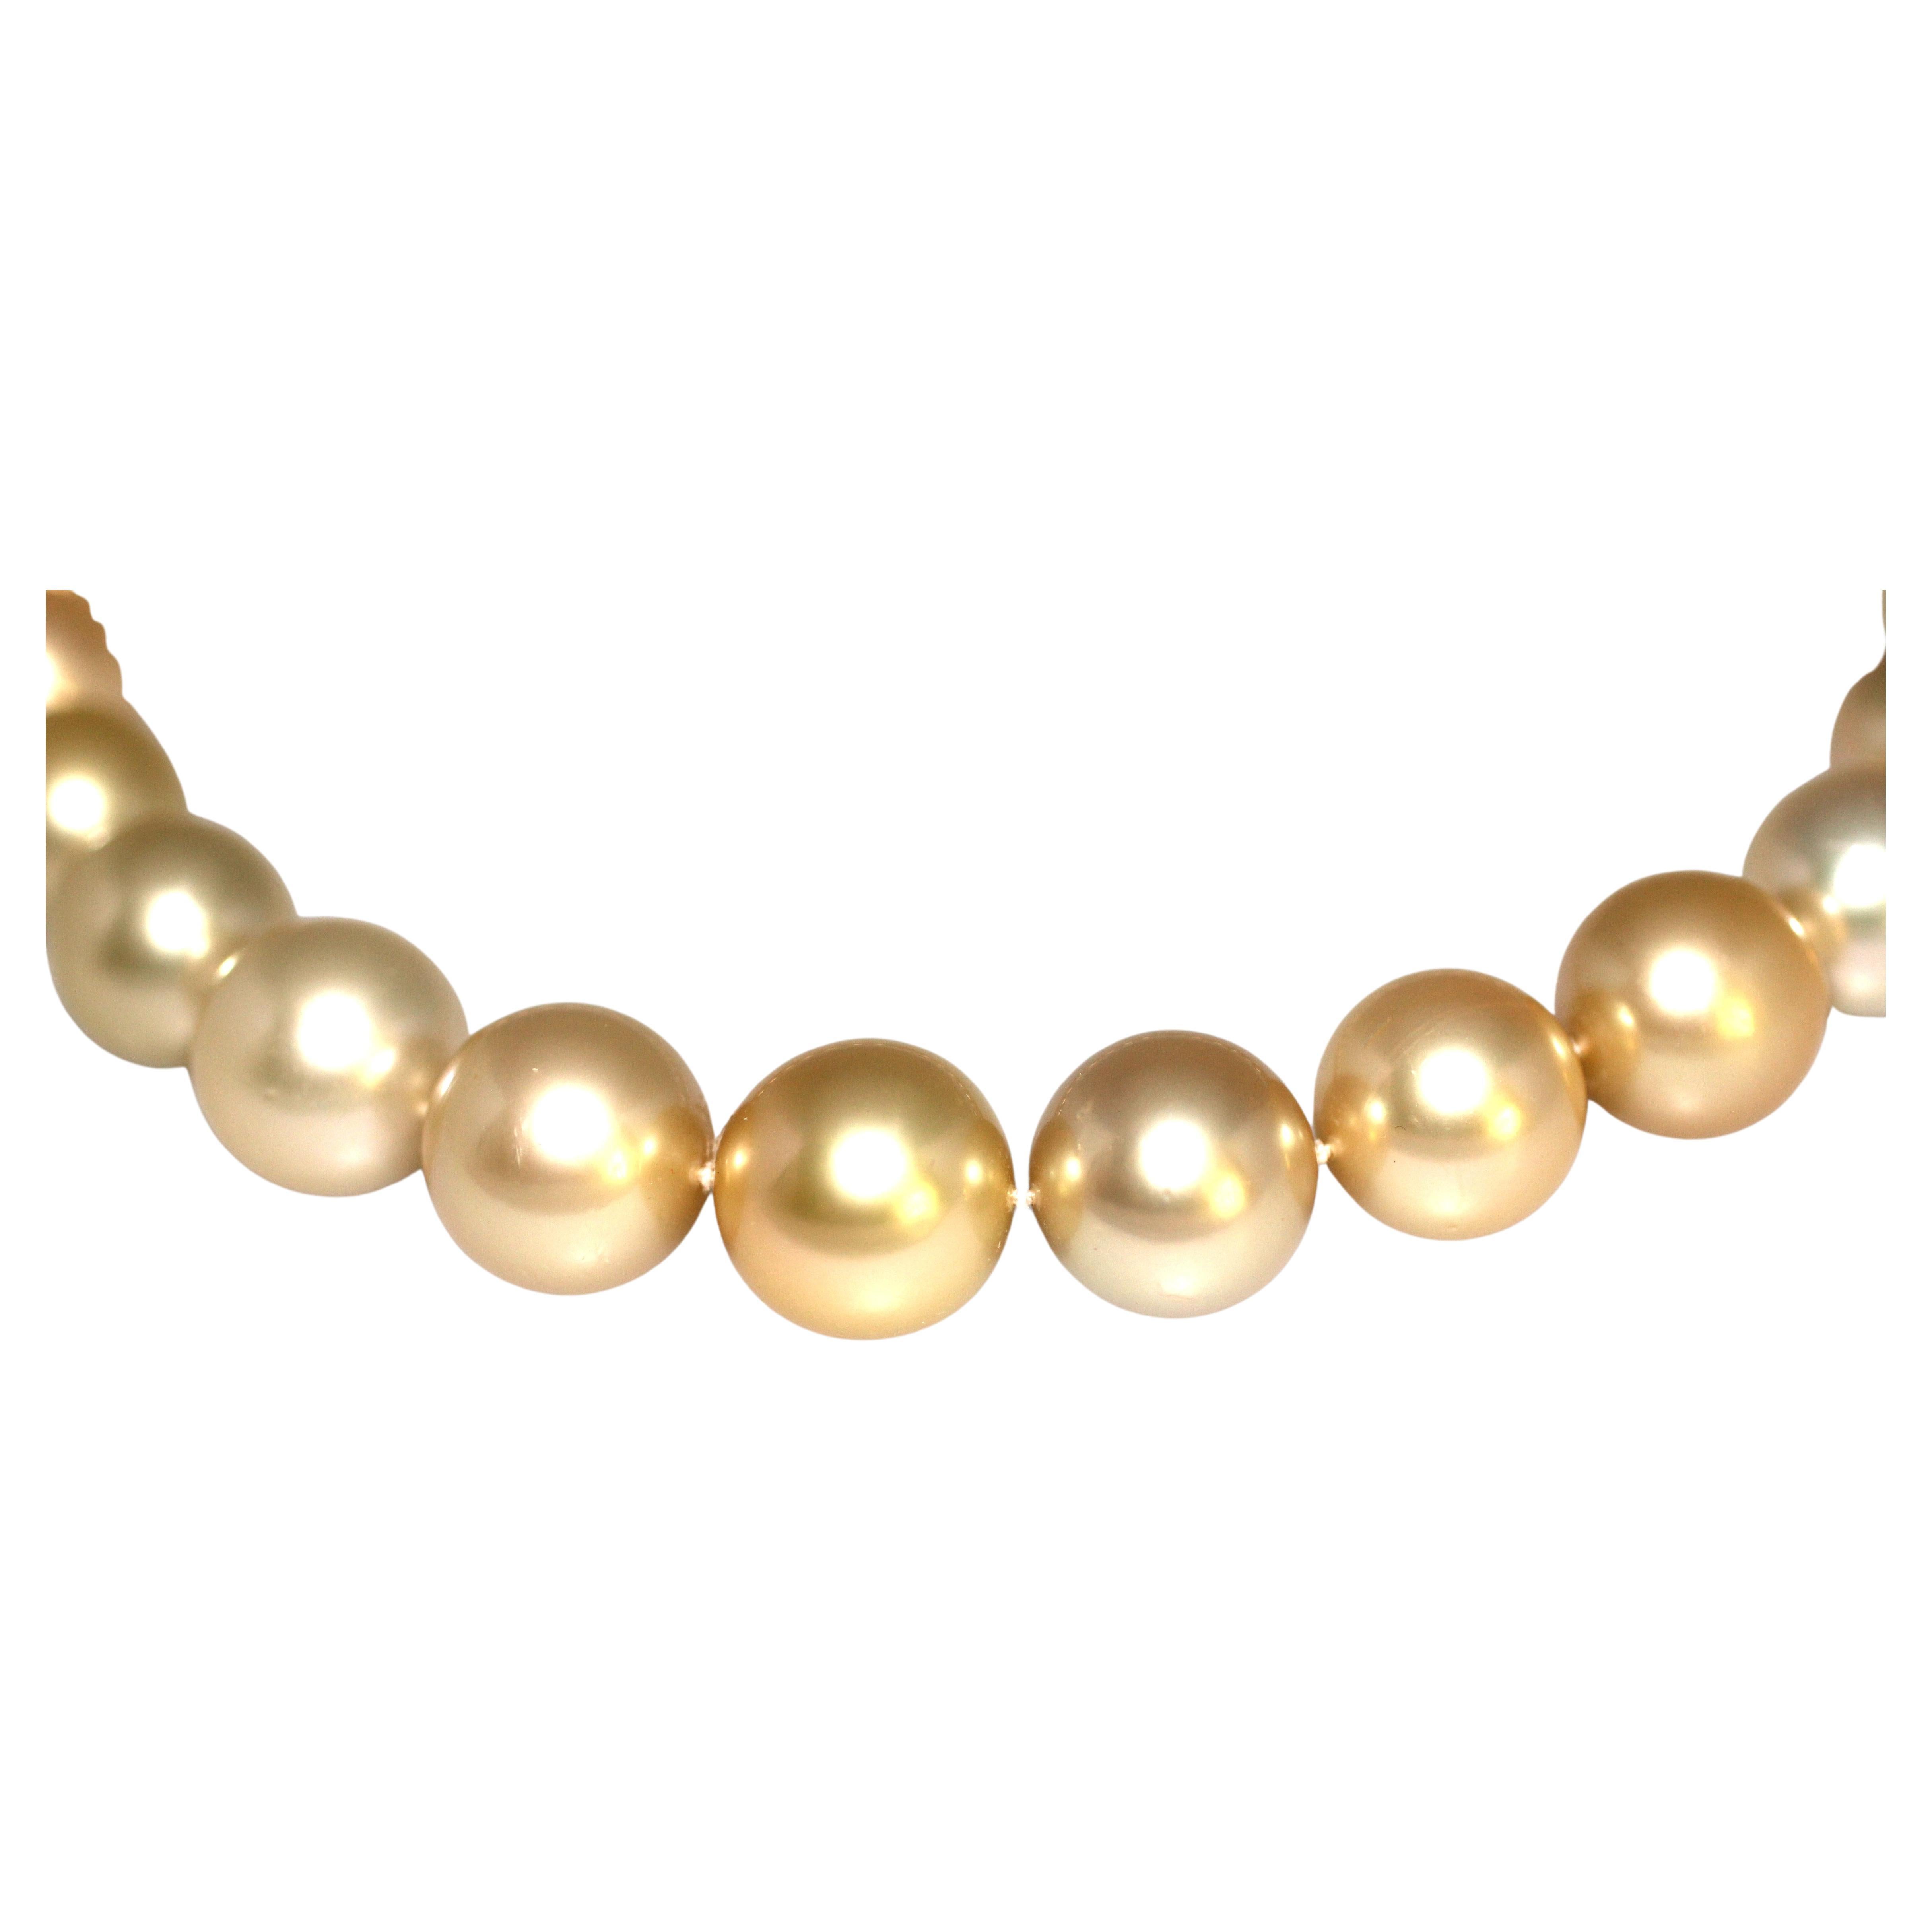 Hakimoto By Jewel Of Ocean
Suggested Retail Price $80,000
27 Golden 13x16mm South Sea Pearl Necklace 18K Yellow Gold Diamond Clasp
16.5